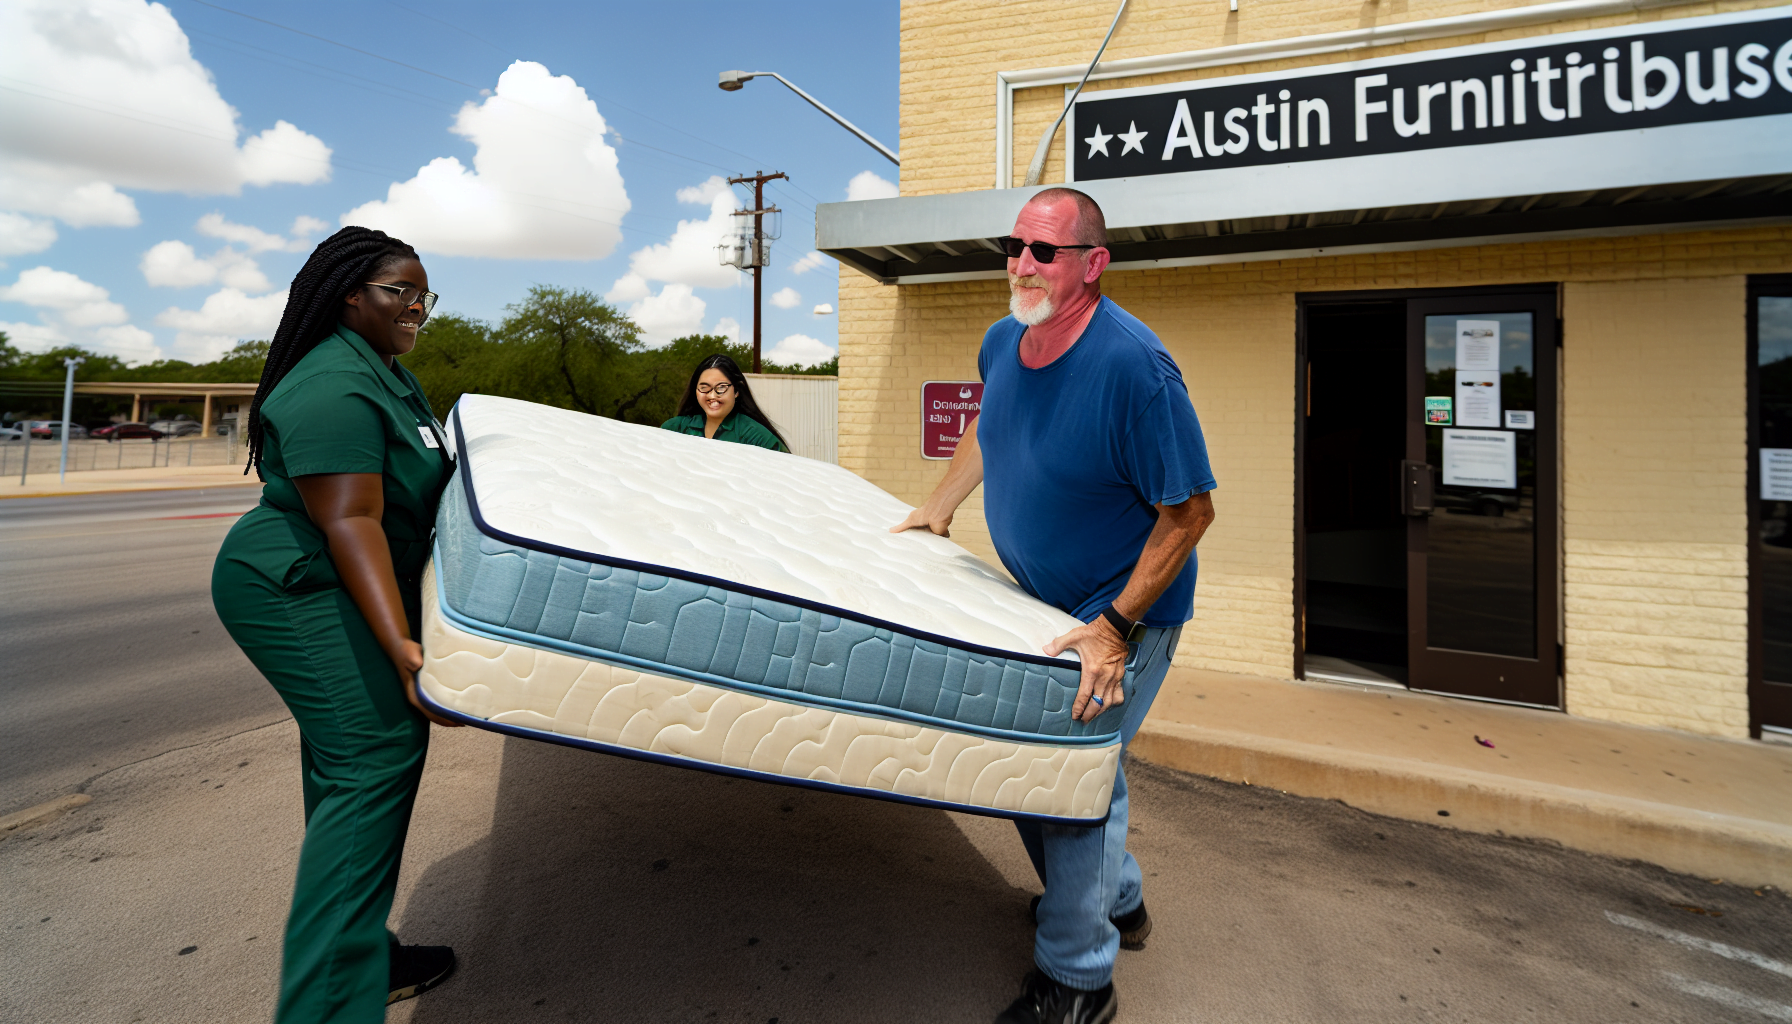 Donating gently used mattress to Austin Furniture Bank